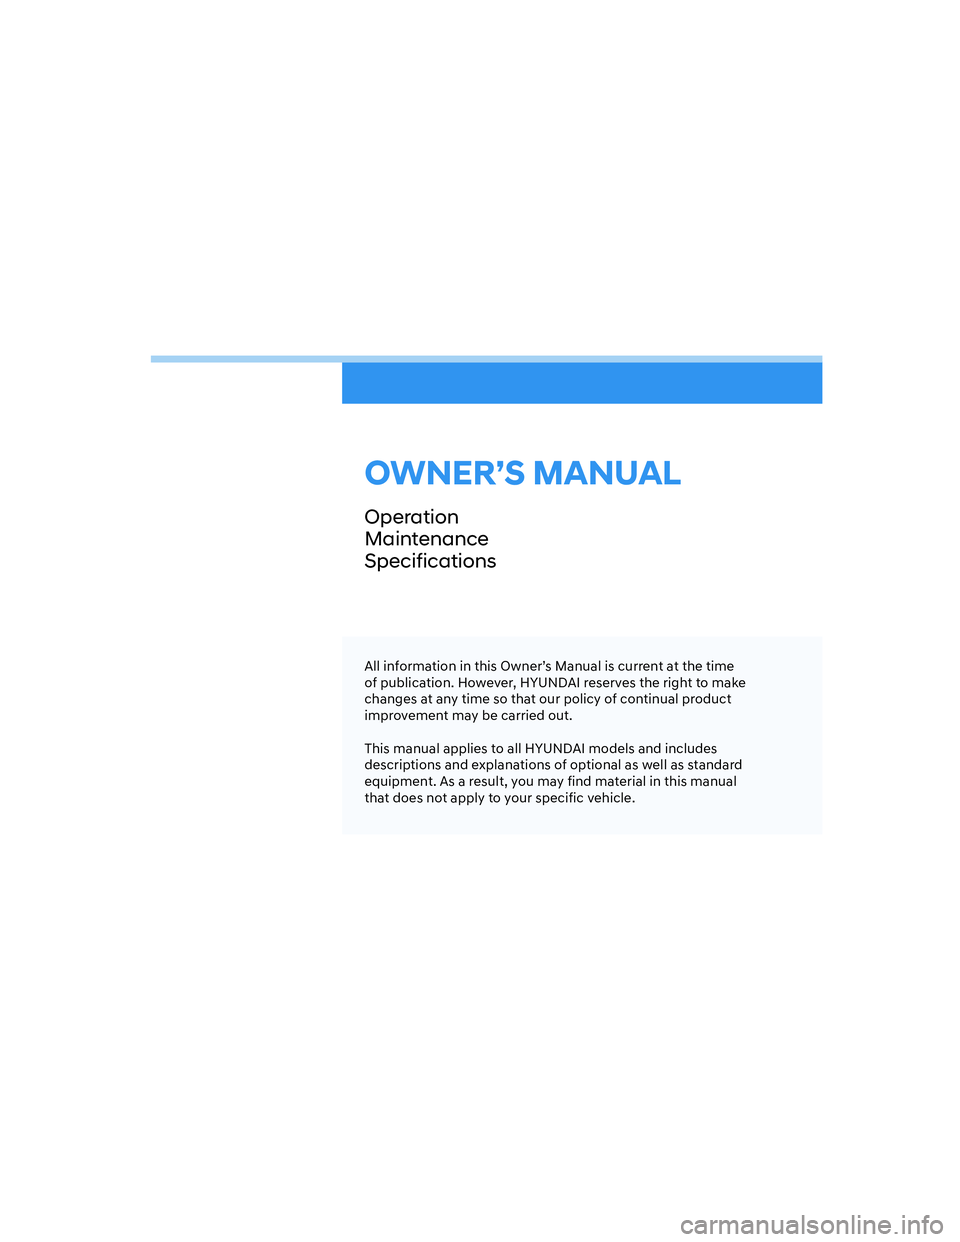 HYUNDAI ELANTRA 2022  Owners Manual OWNER’S MANUAL
Operation
Maintenance
Specifications
All information in this Owner’s Manual is current at the time 
of publication. However, HYUNDAI reserves the right to make 
changes at any time 